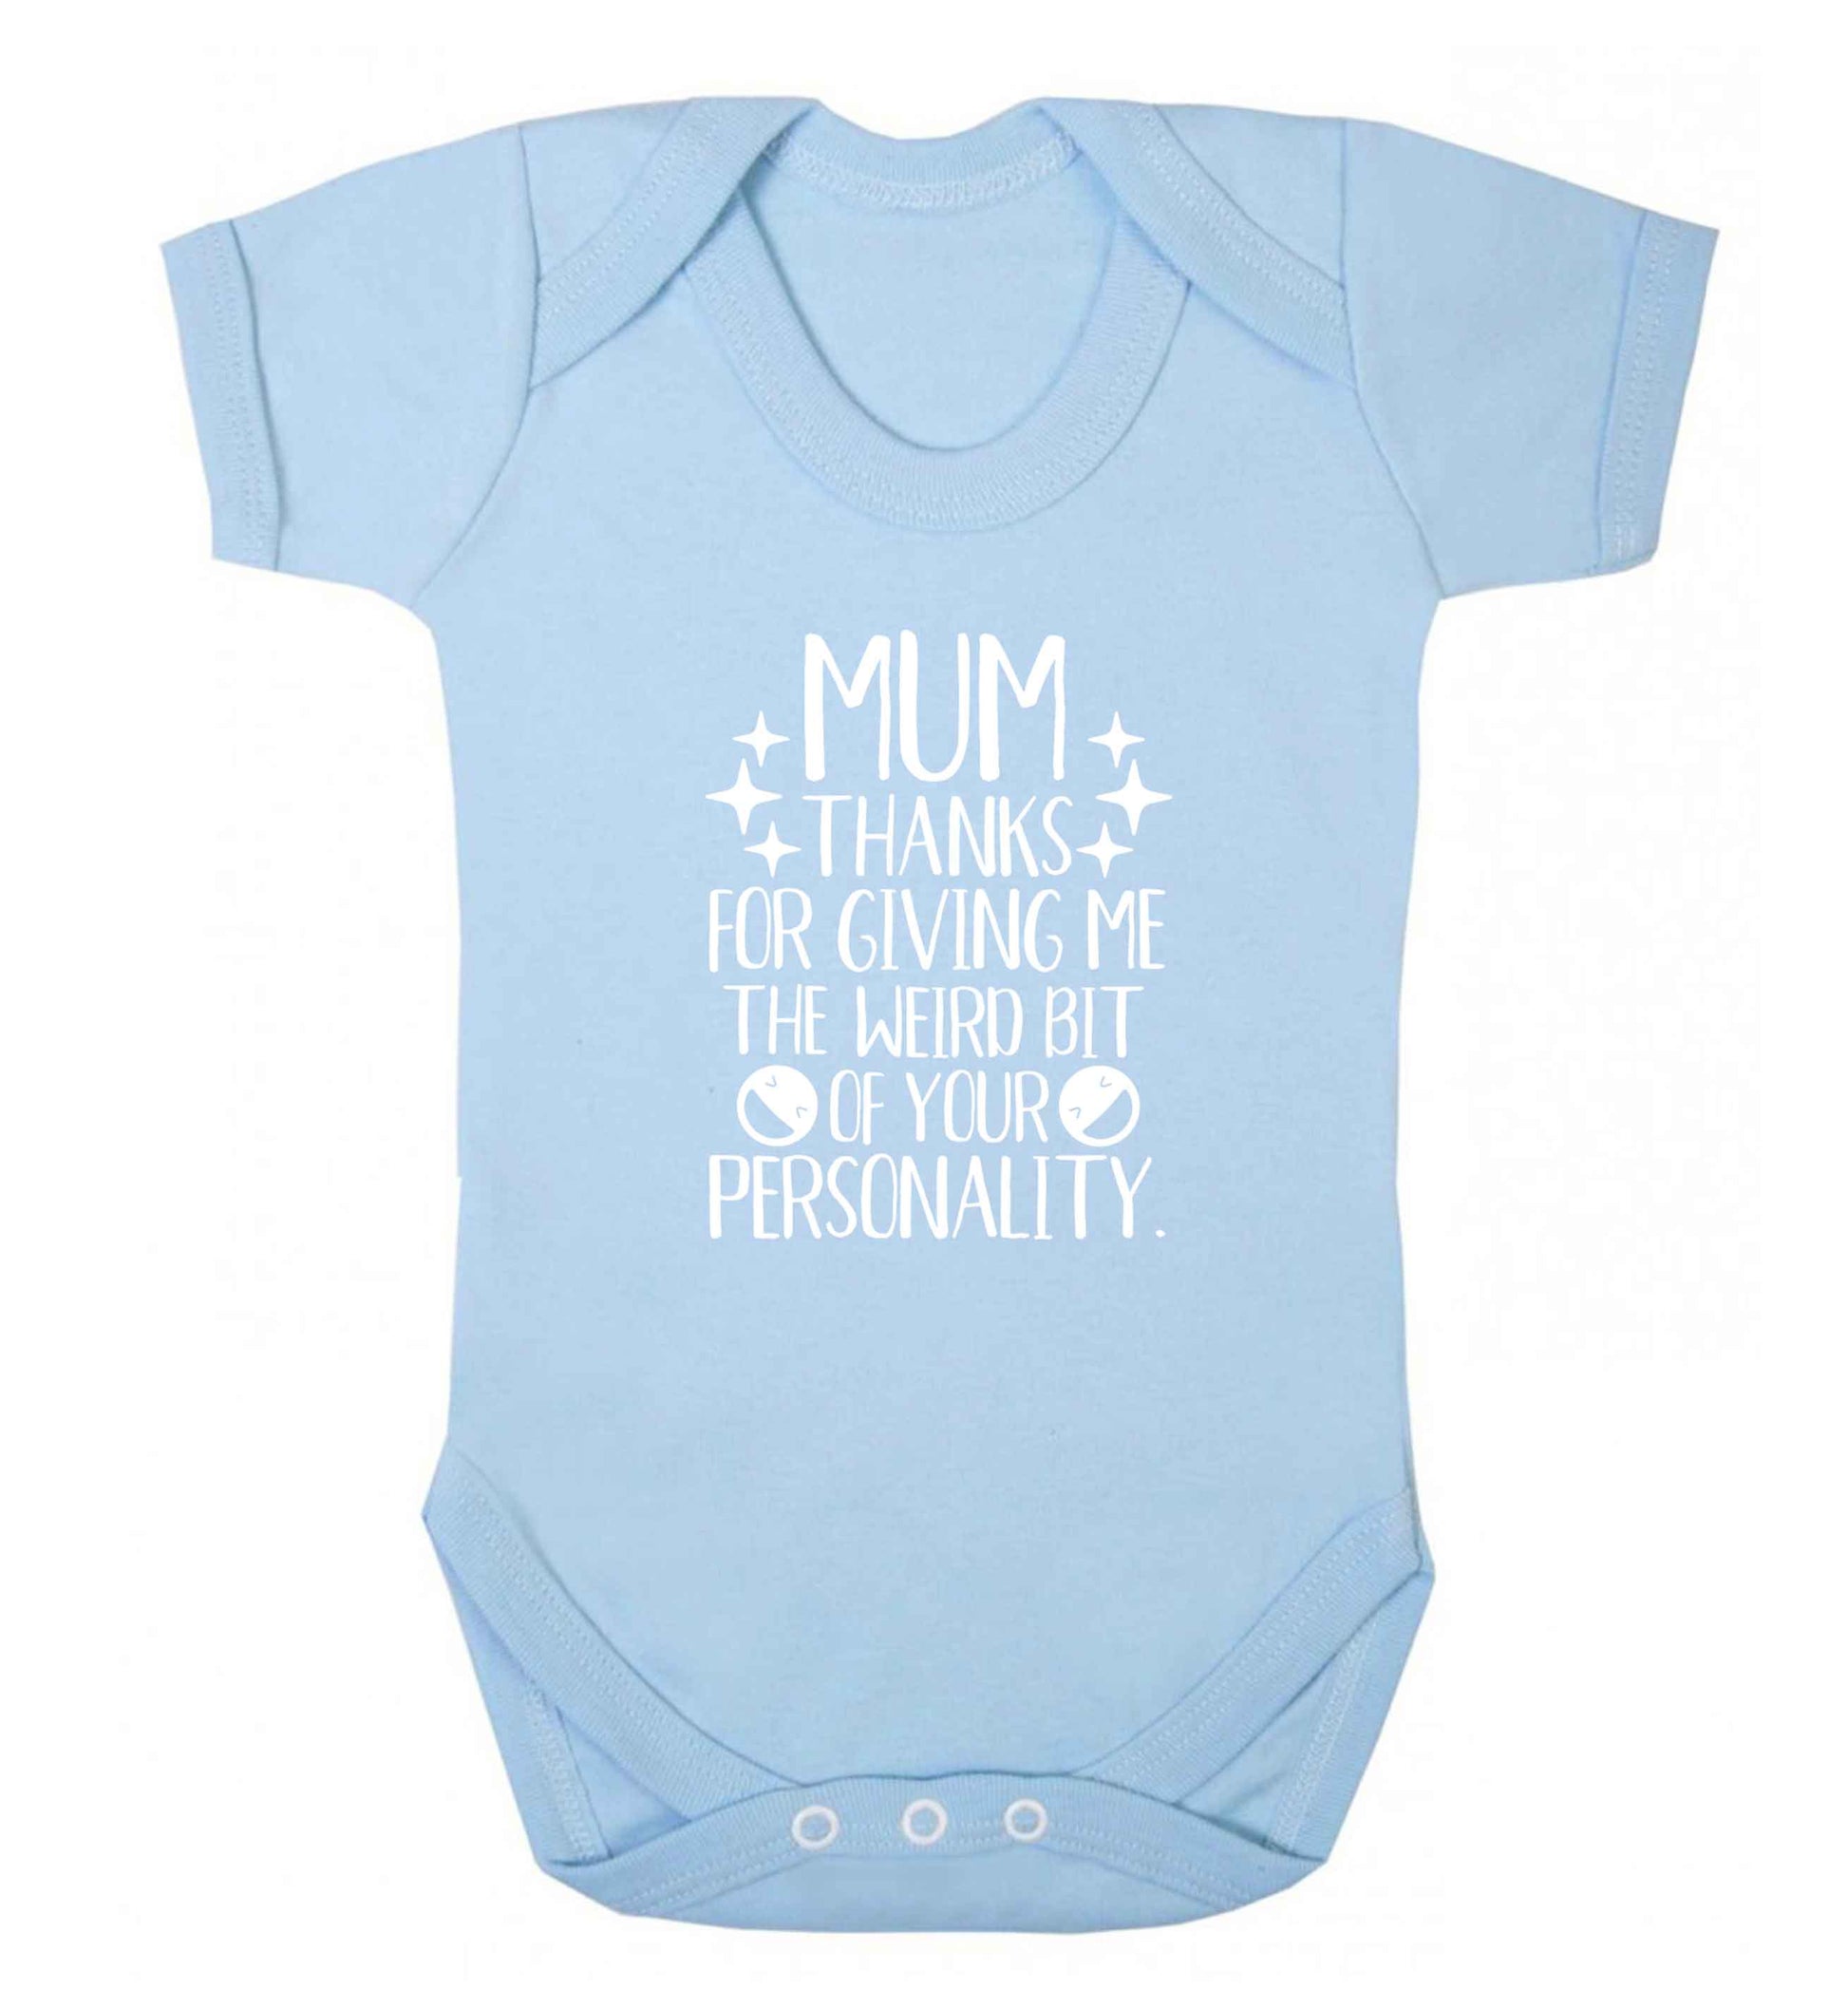 Mum, I love you more than halloumi and if you know me at all you know how deep that is baby vest pale blue 18-24 months